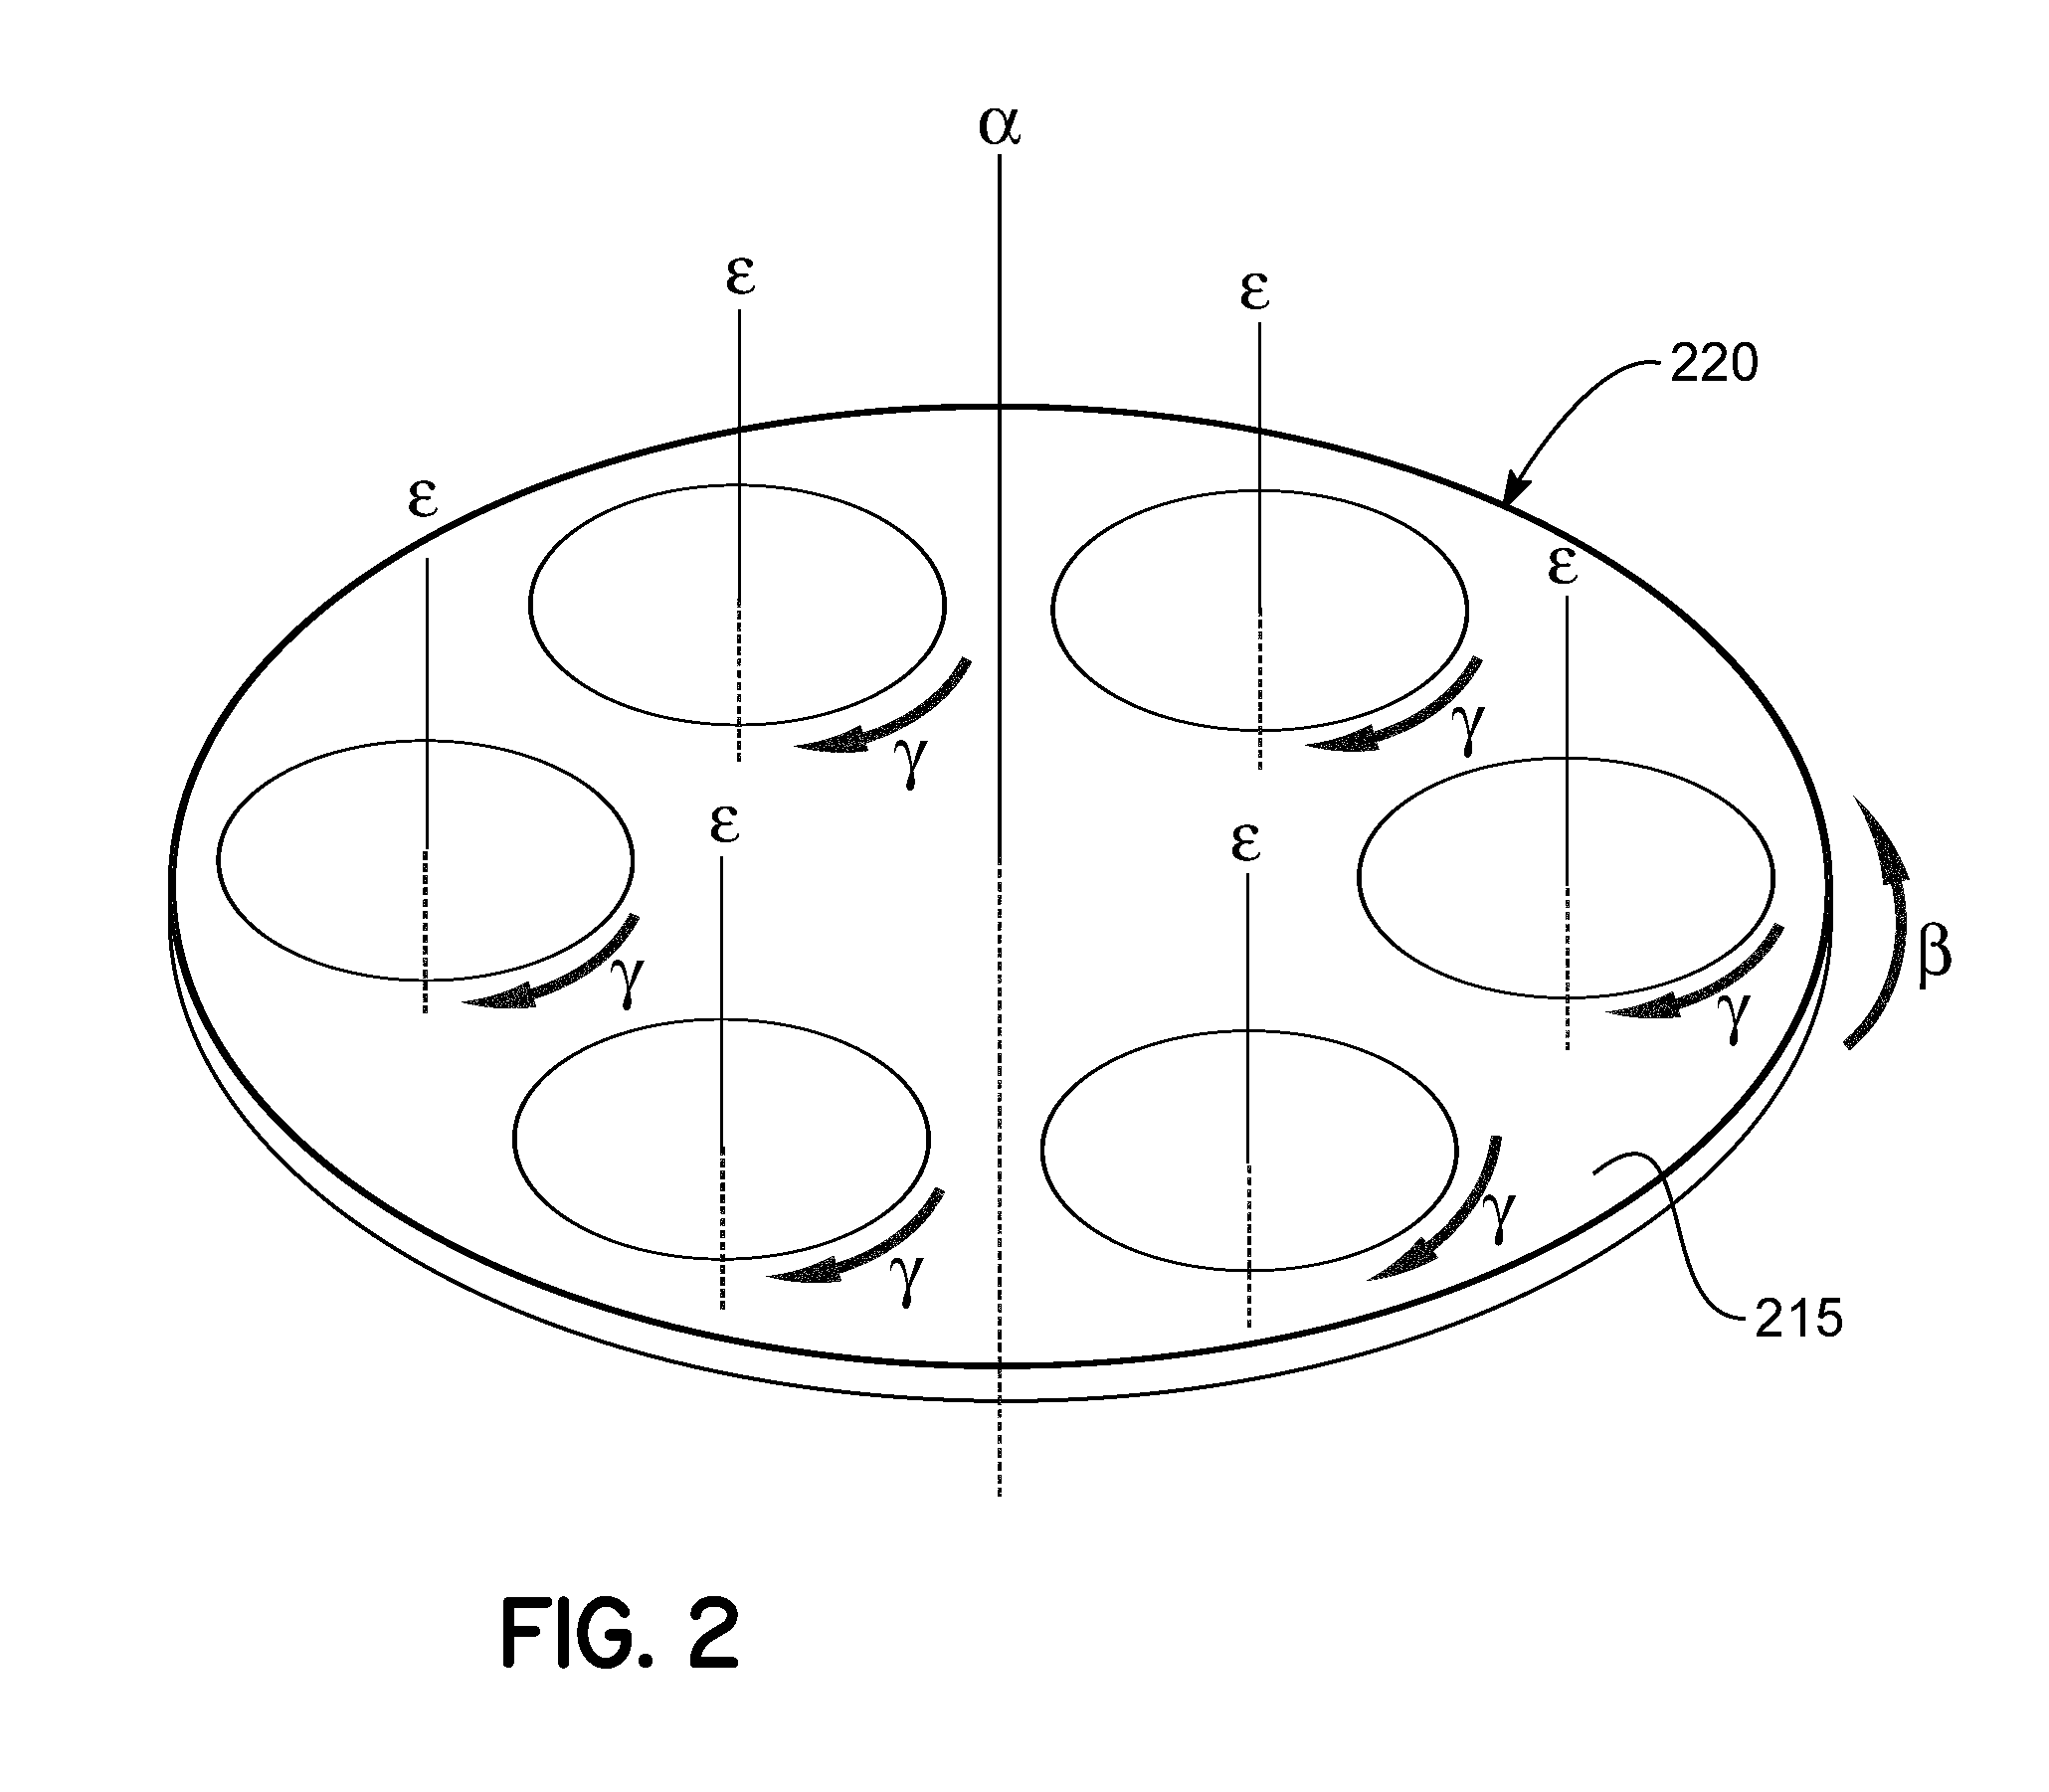 Multi-wafer rotating disc reactor with inertial planetary drive